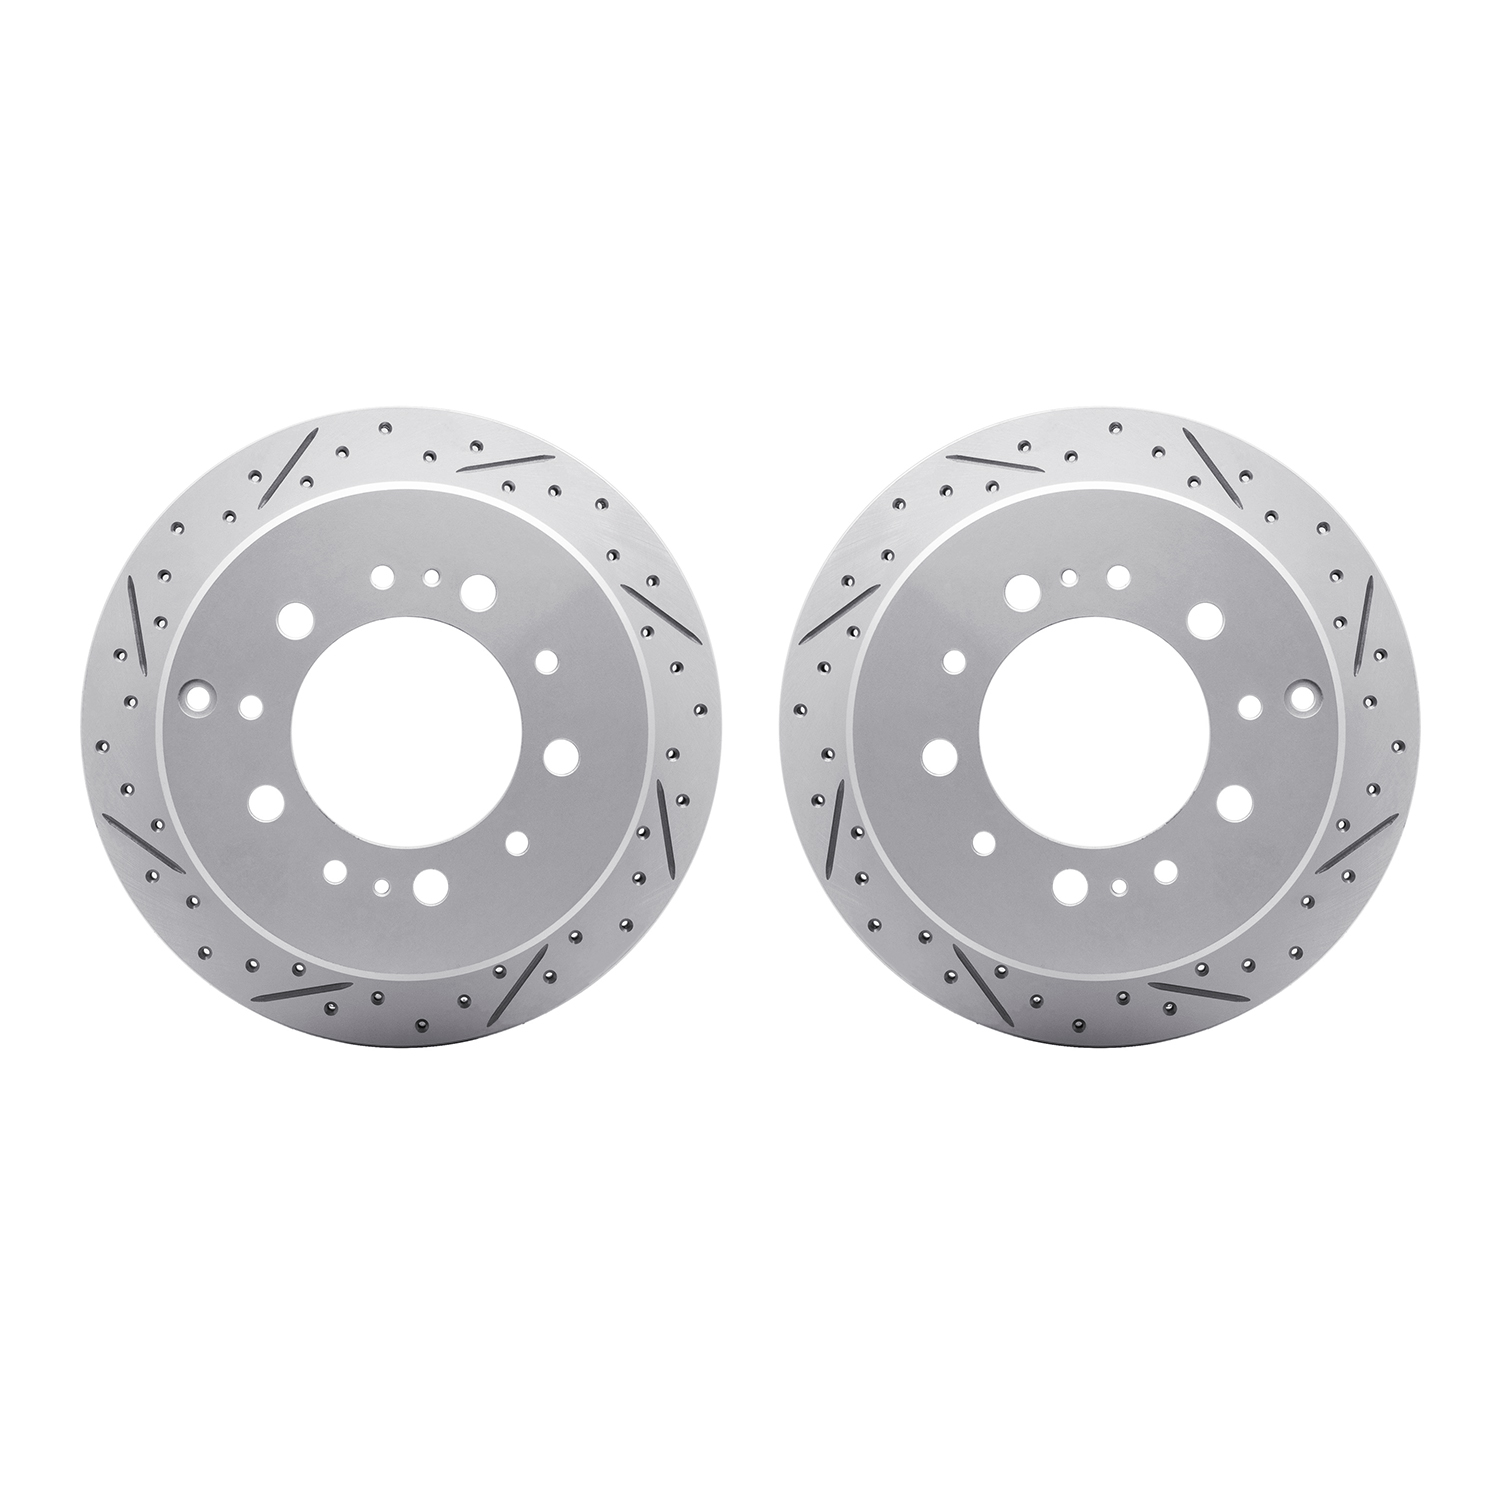 2002-76048 Geoperformance Drilled/Slotted Brake Rotors, 1998-2007 Lexus/Toyota/Scion, Position: Rear